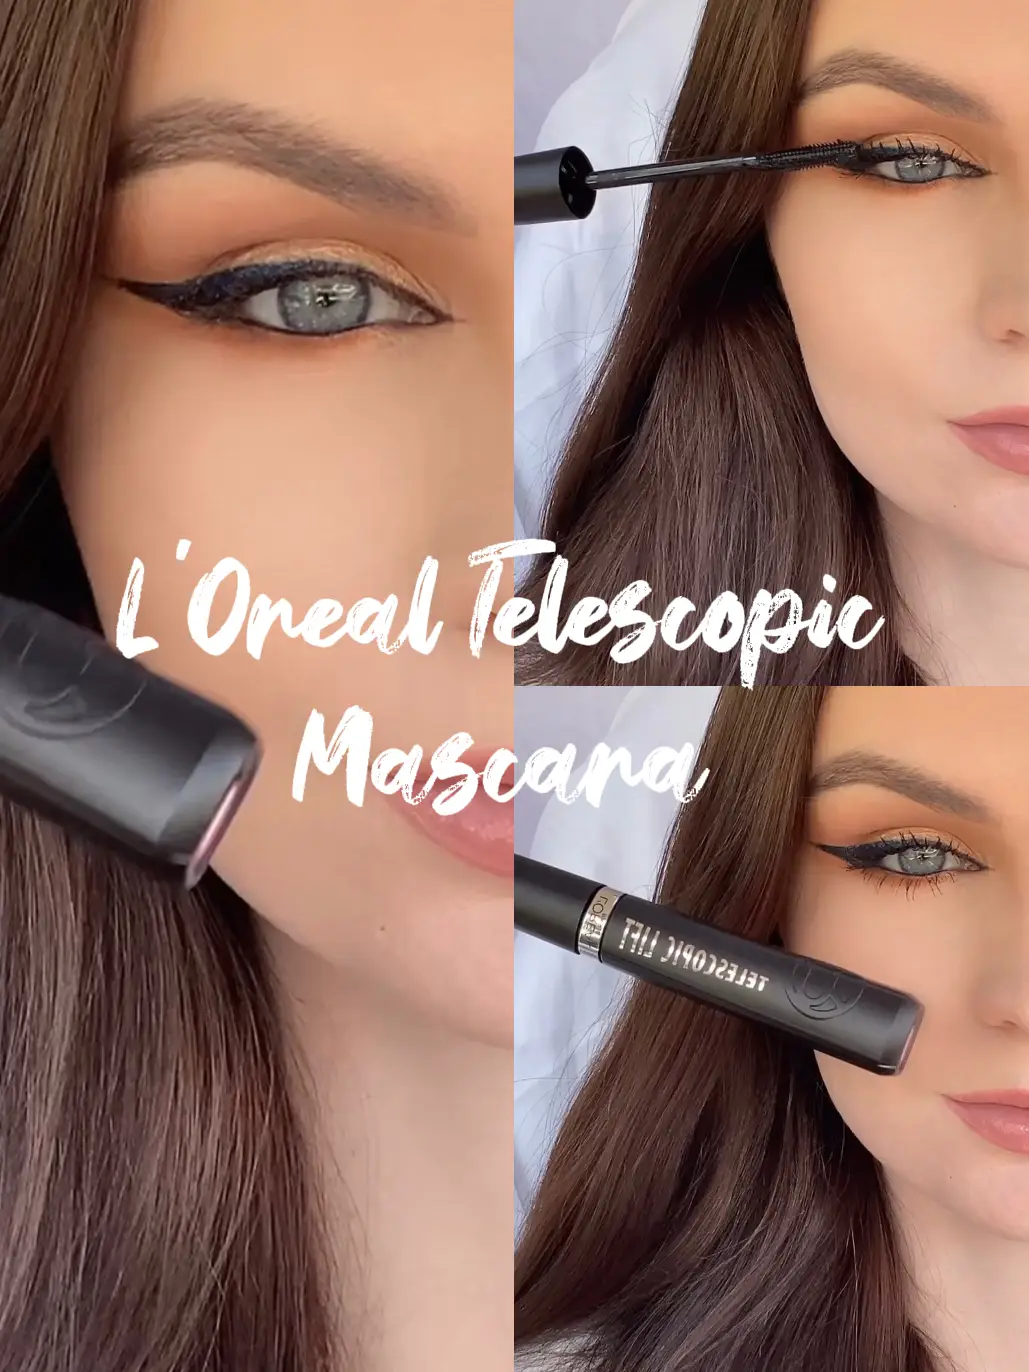 L'Oreal Telescopic Mascara, Gallery posted by sarahgreening